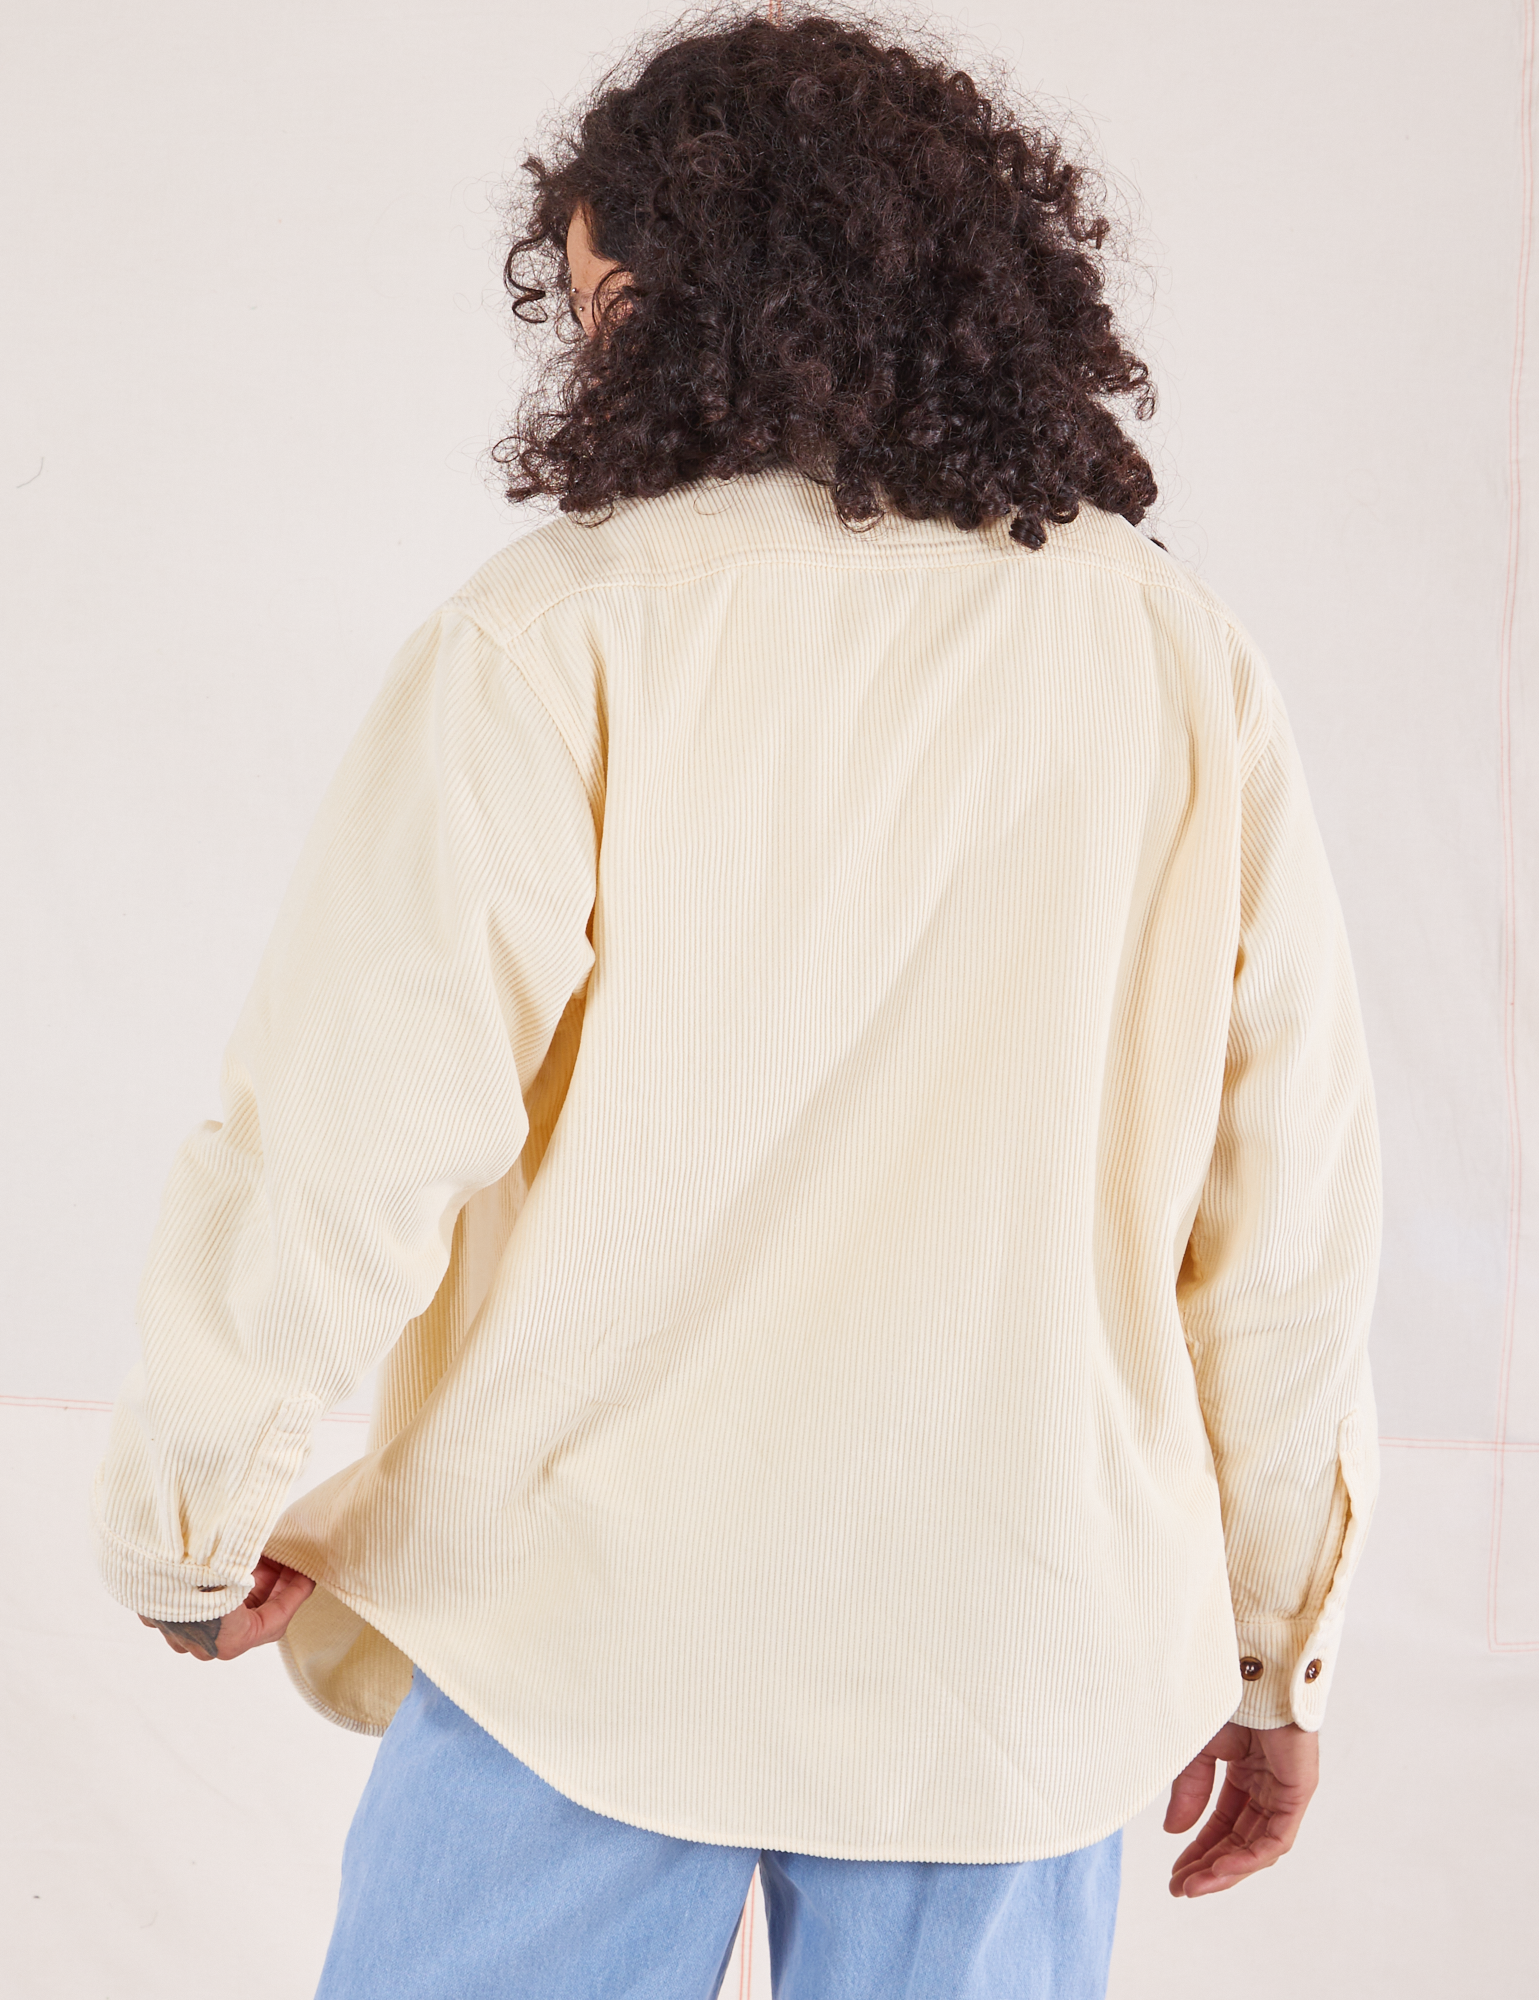 Corduroy Overshirt in Vintage Off-White back view on Jesse